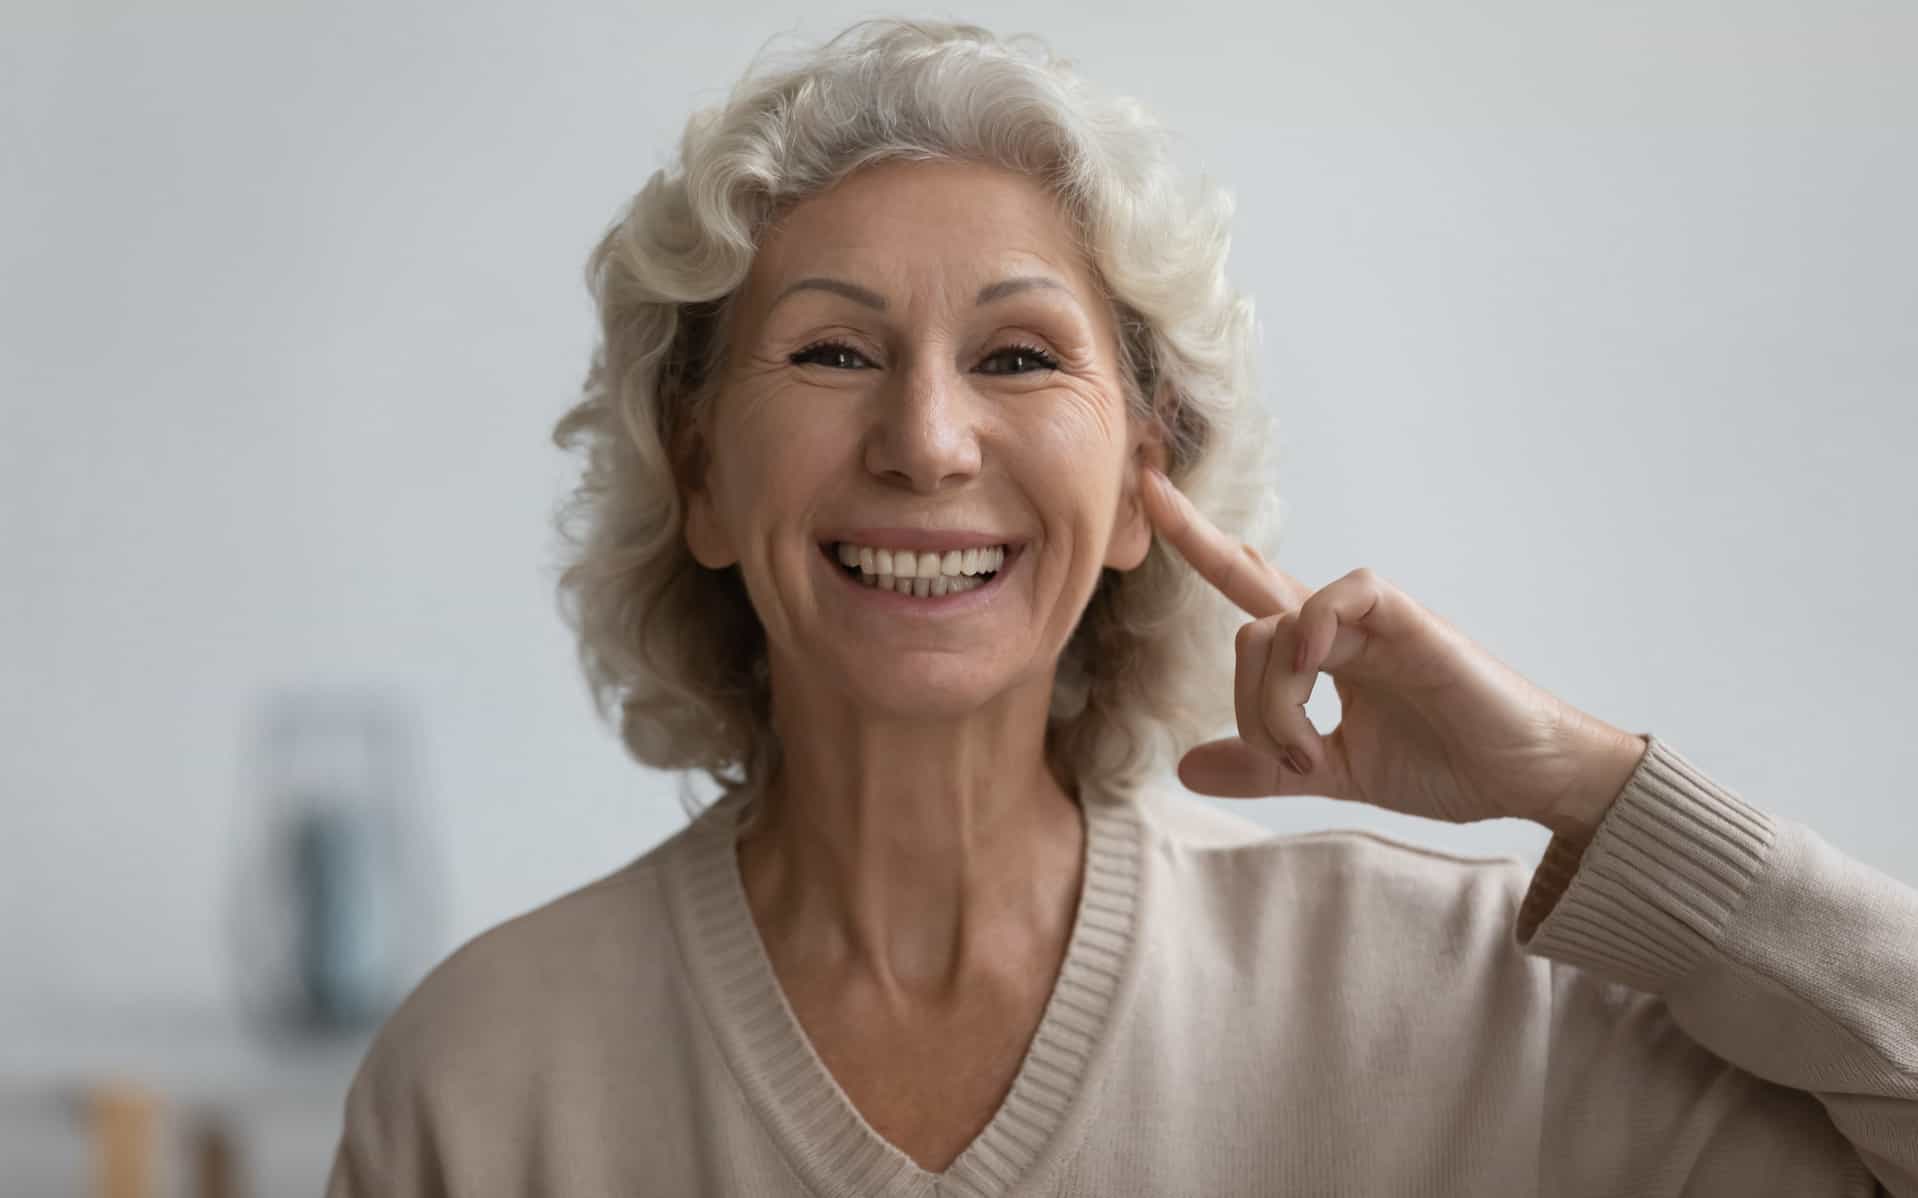 Woman Smiling pointing at ear